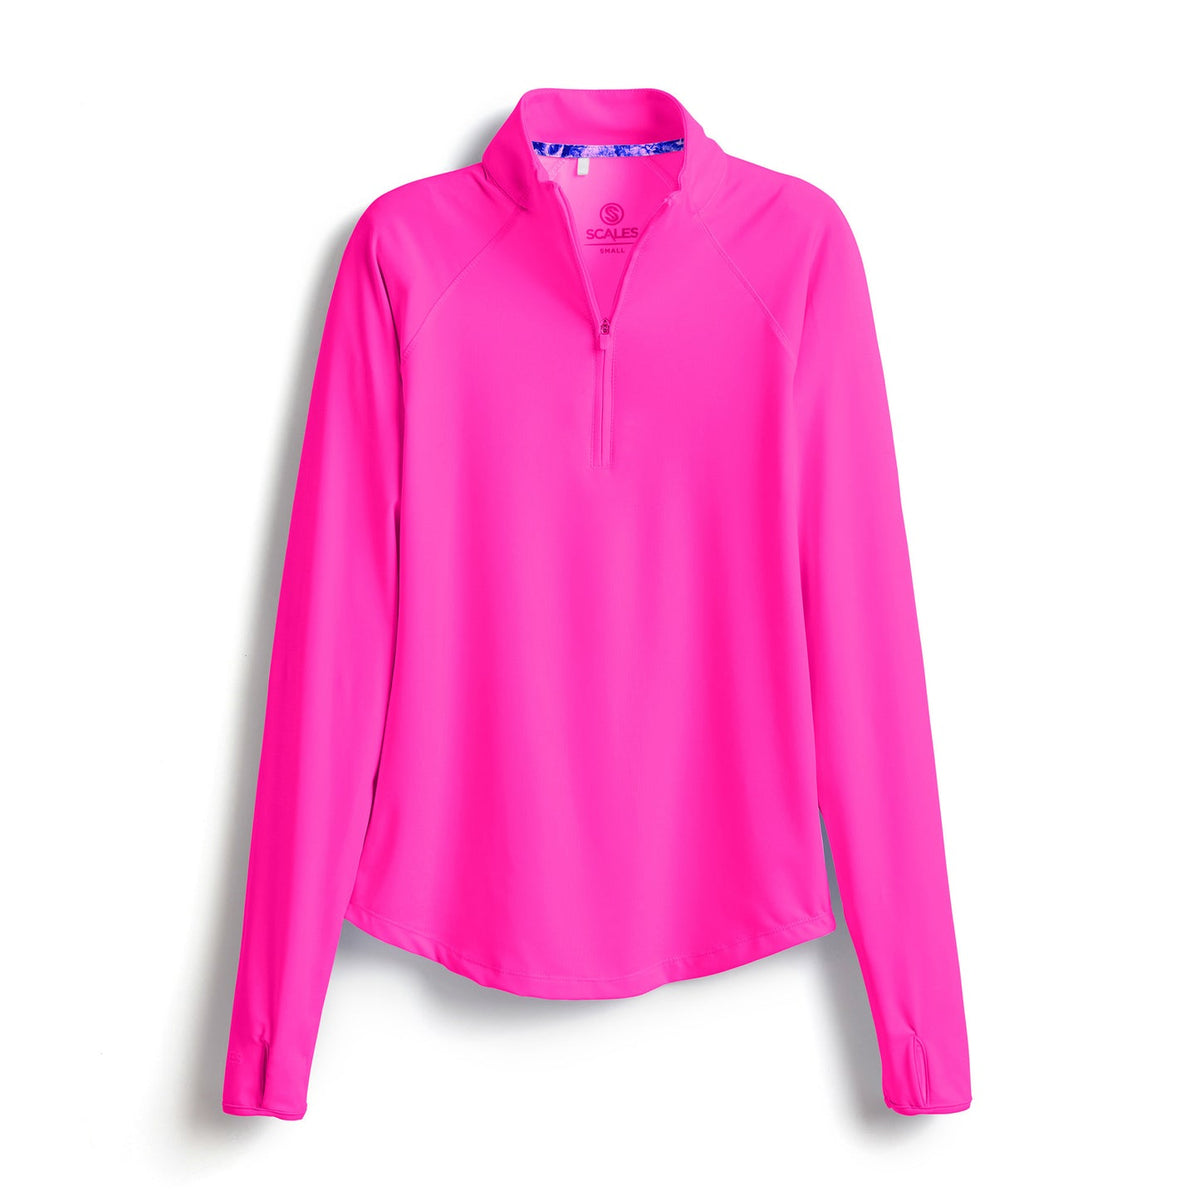 SCALES Offshore Core Womens Long Sleeve Quarter-Zip